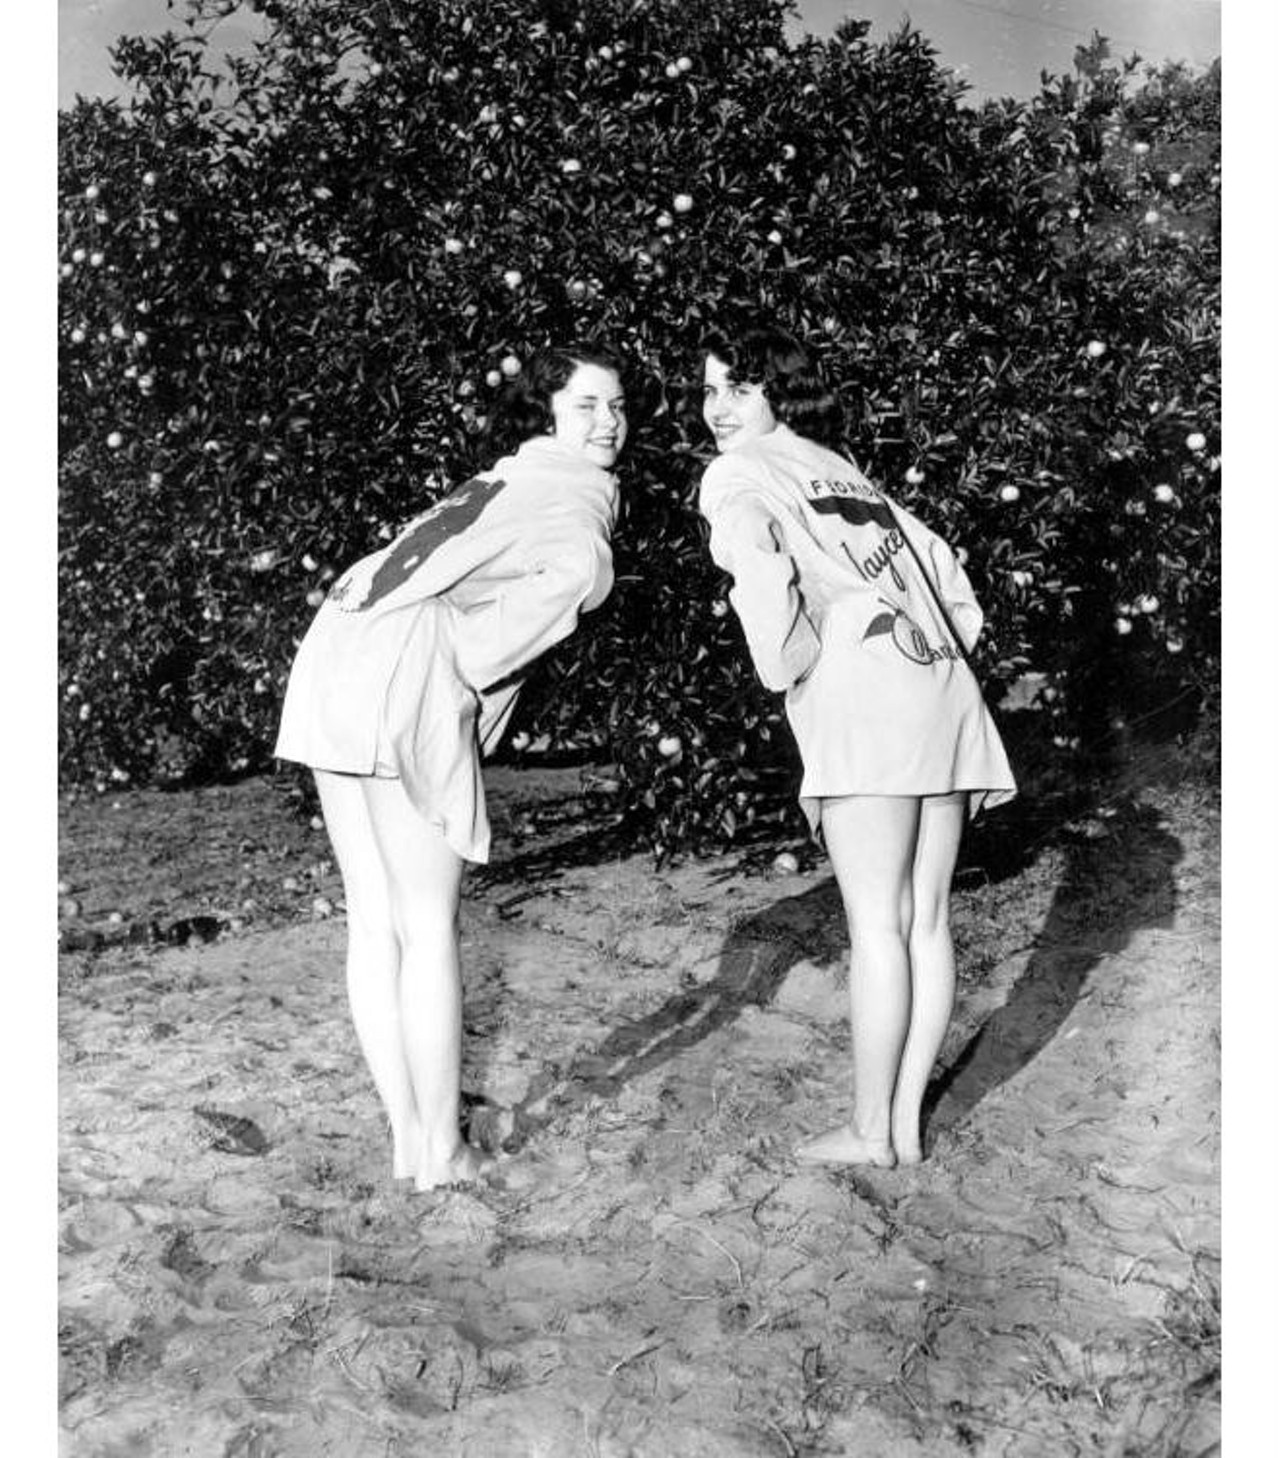 Two young women posing in front of orange trees